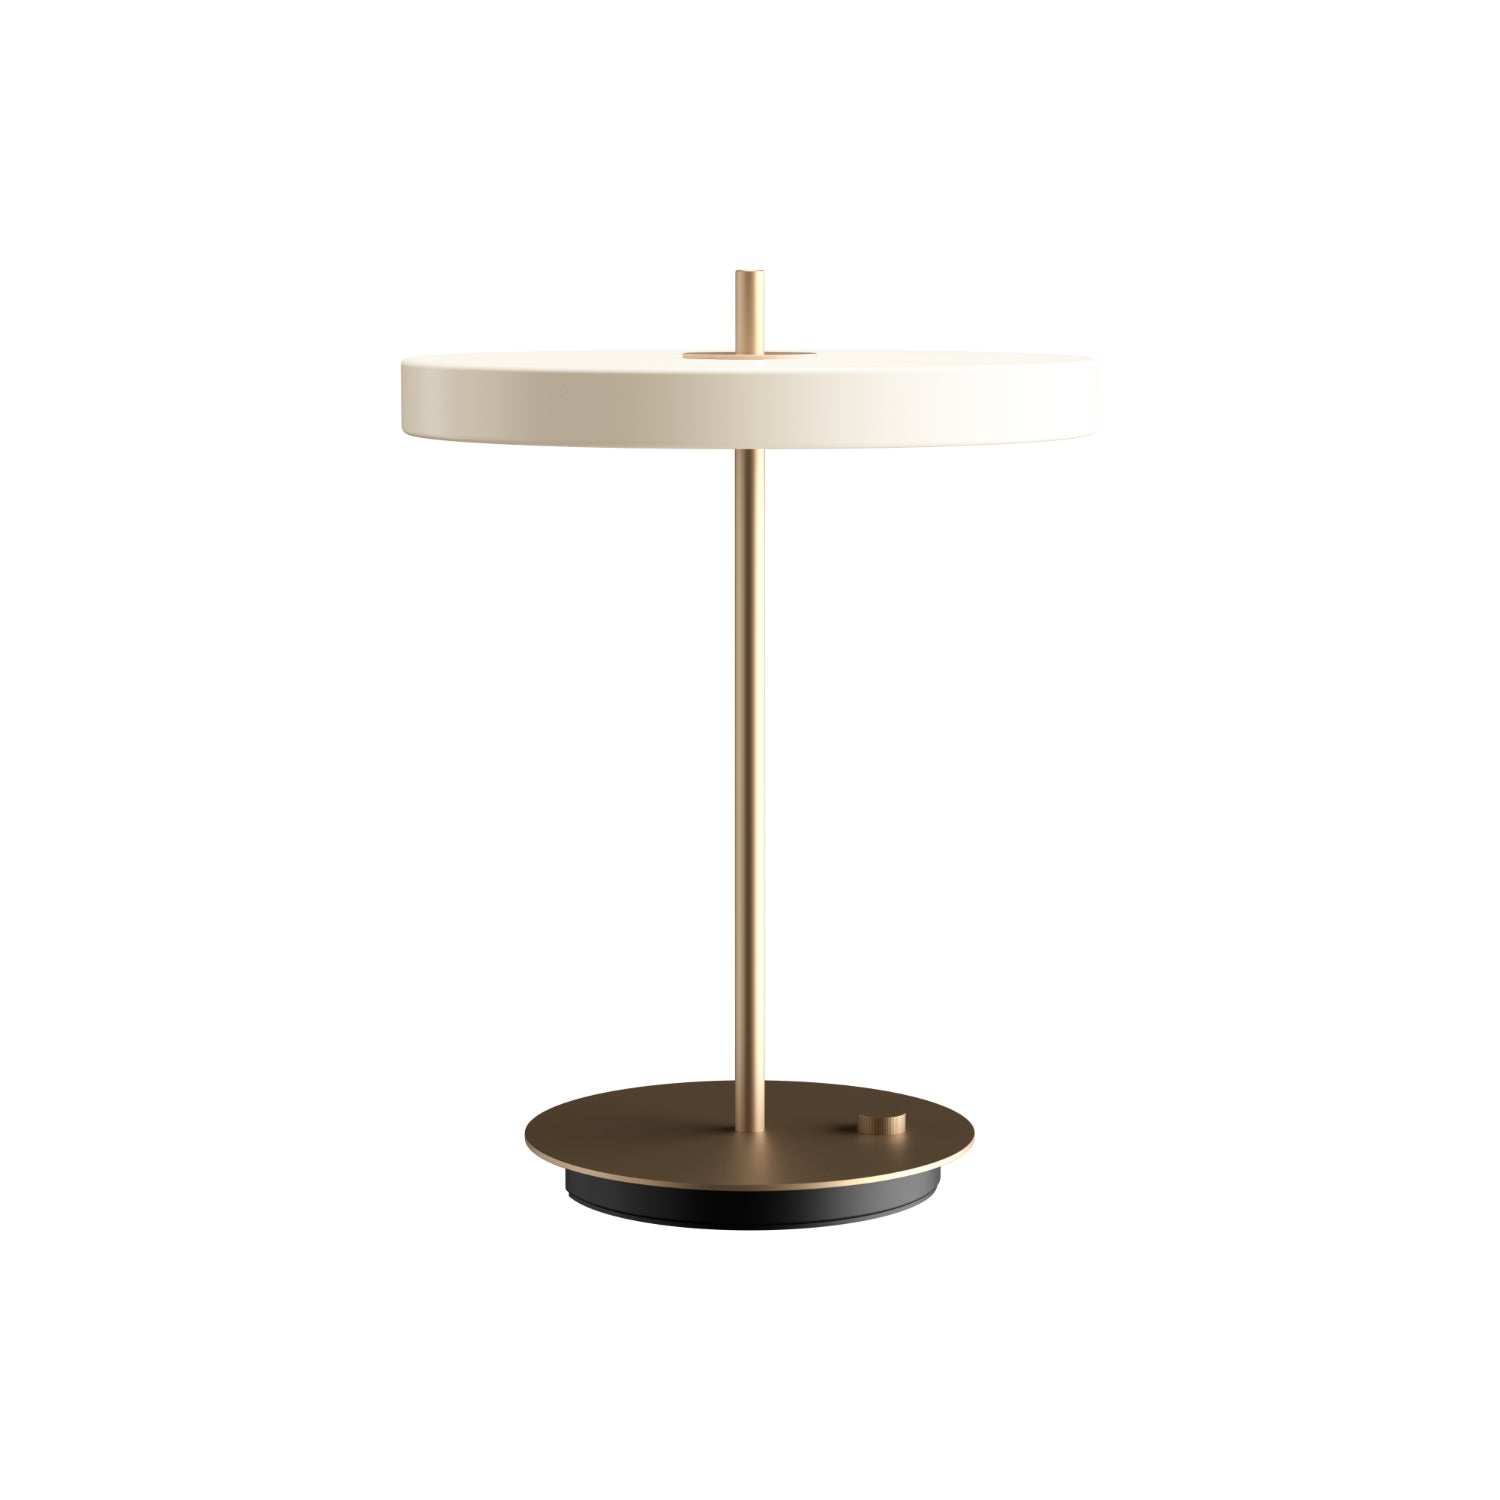 UMAGE - Asteria Table | Table lamp